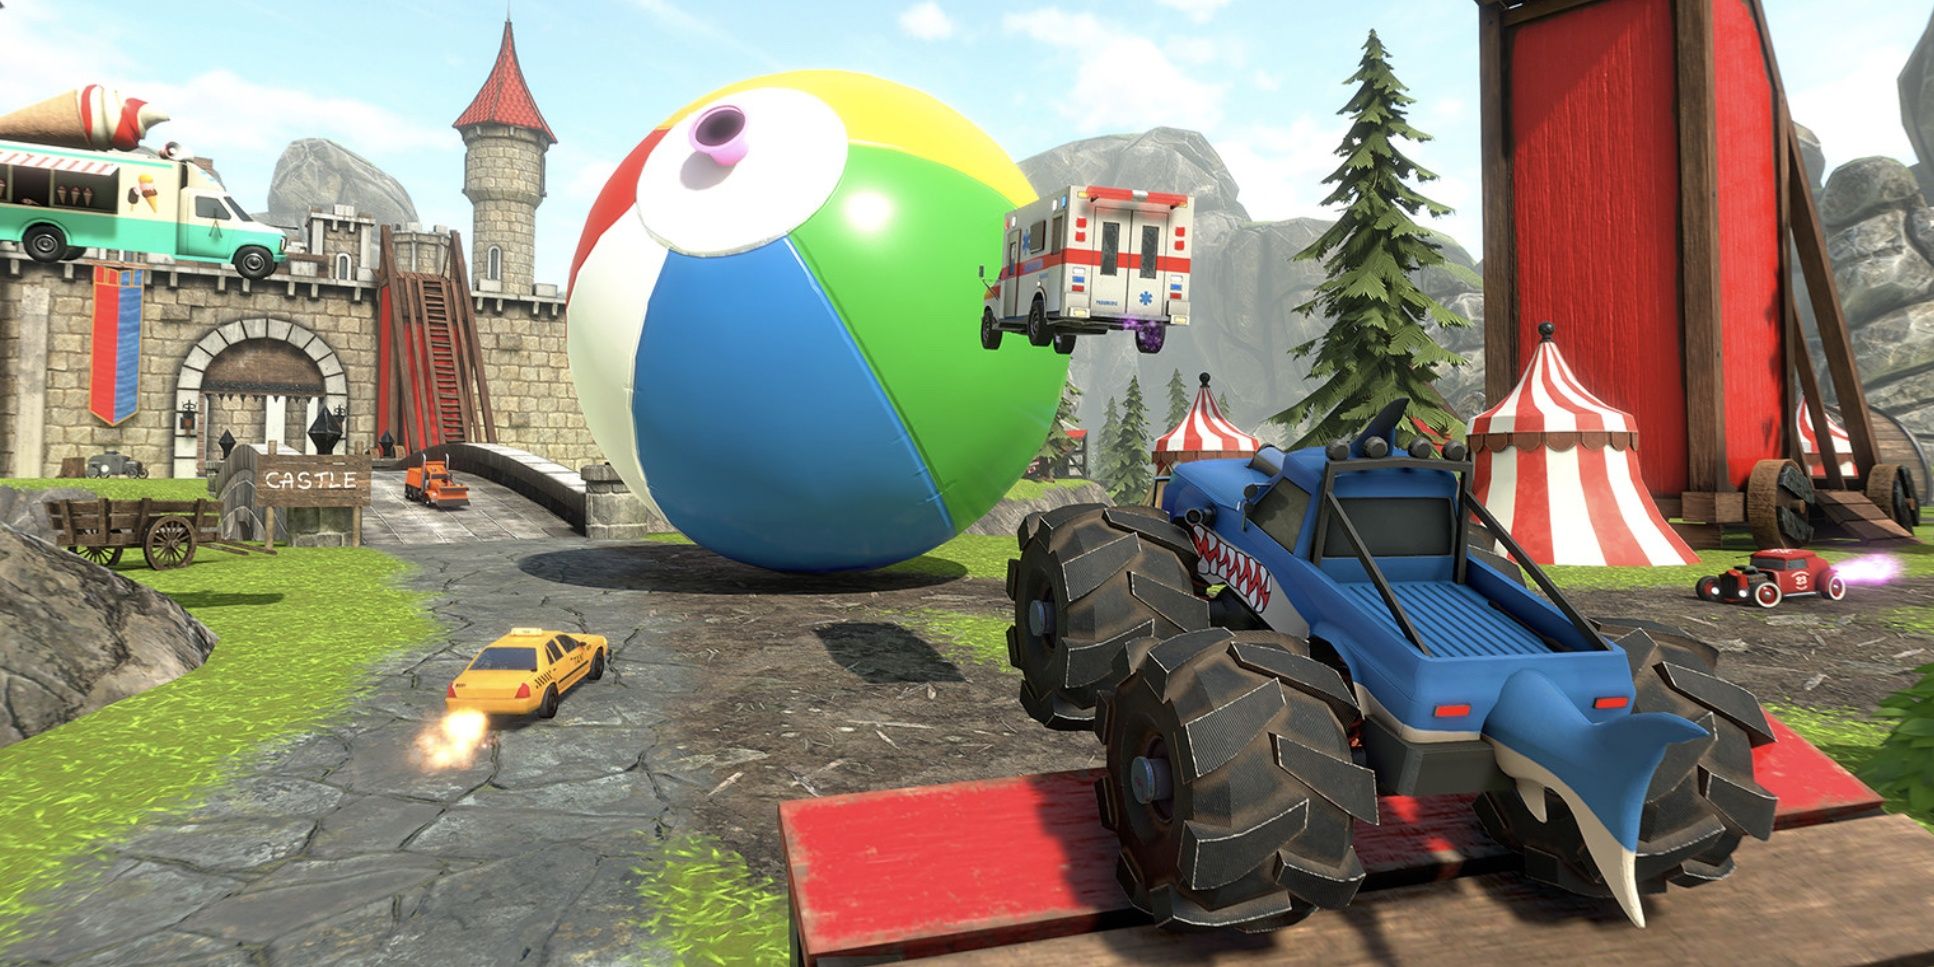 crash drive 3 monster truck and giant beach ball in castle location